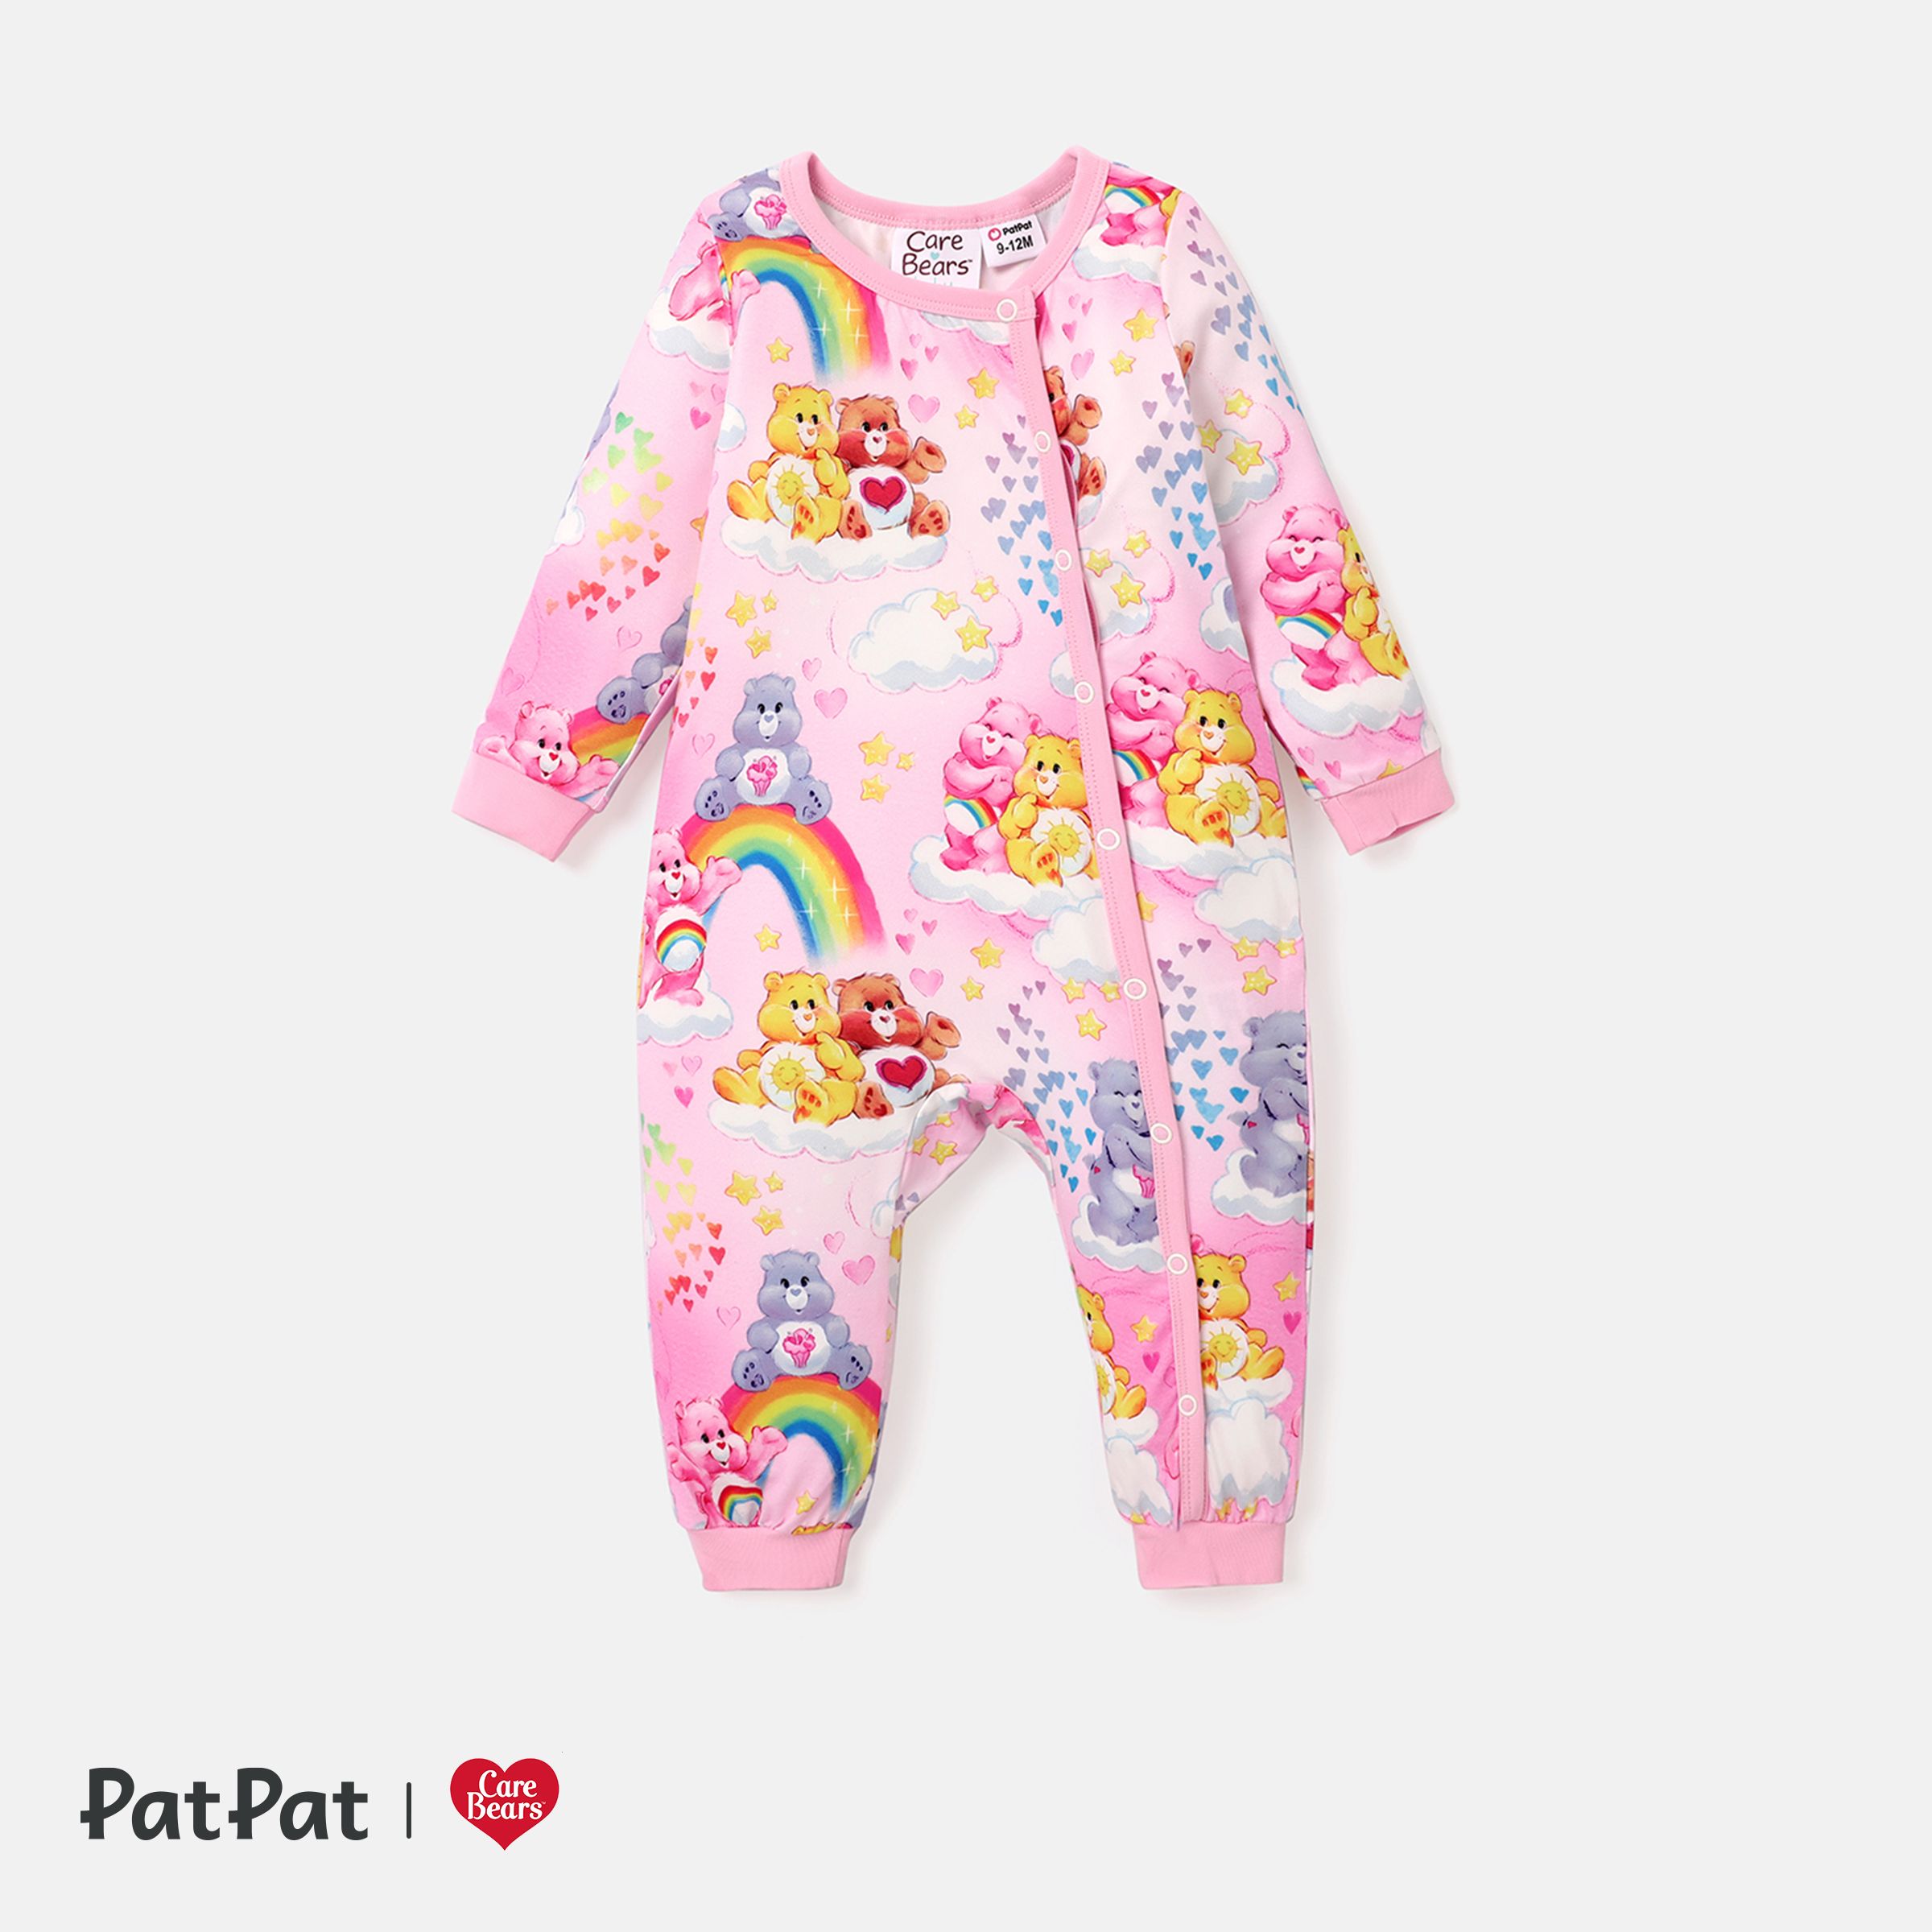 Care Bears Baby Girl Cute Romper / One Piece